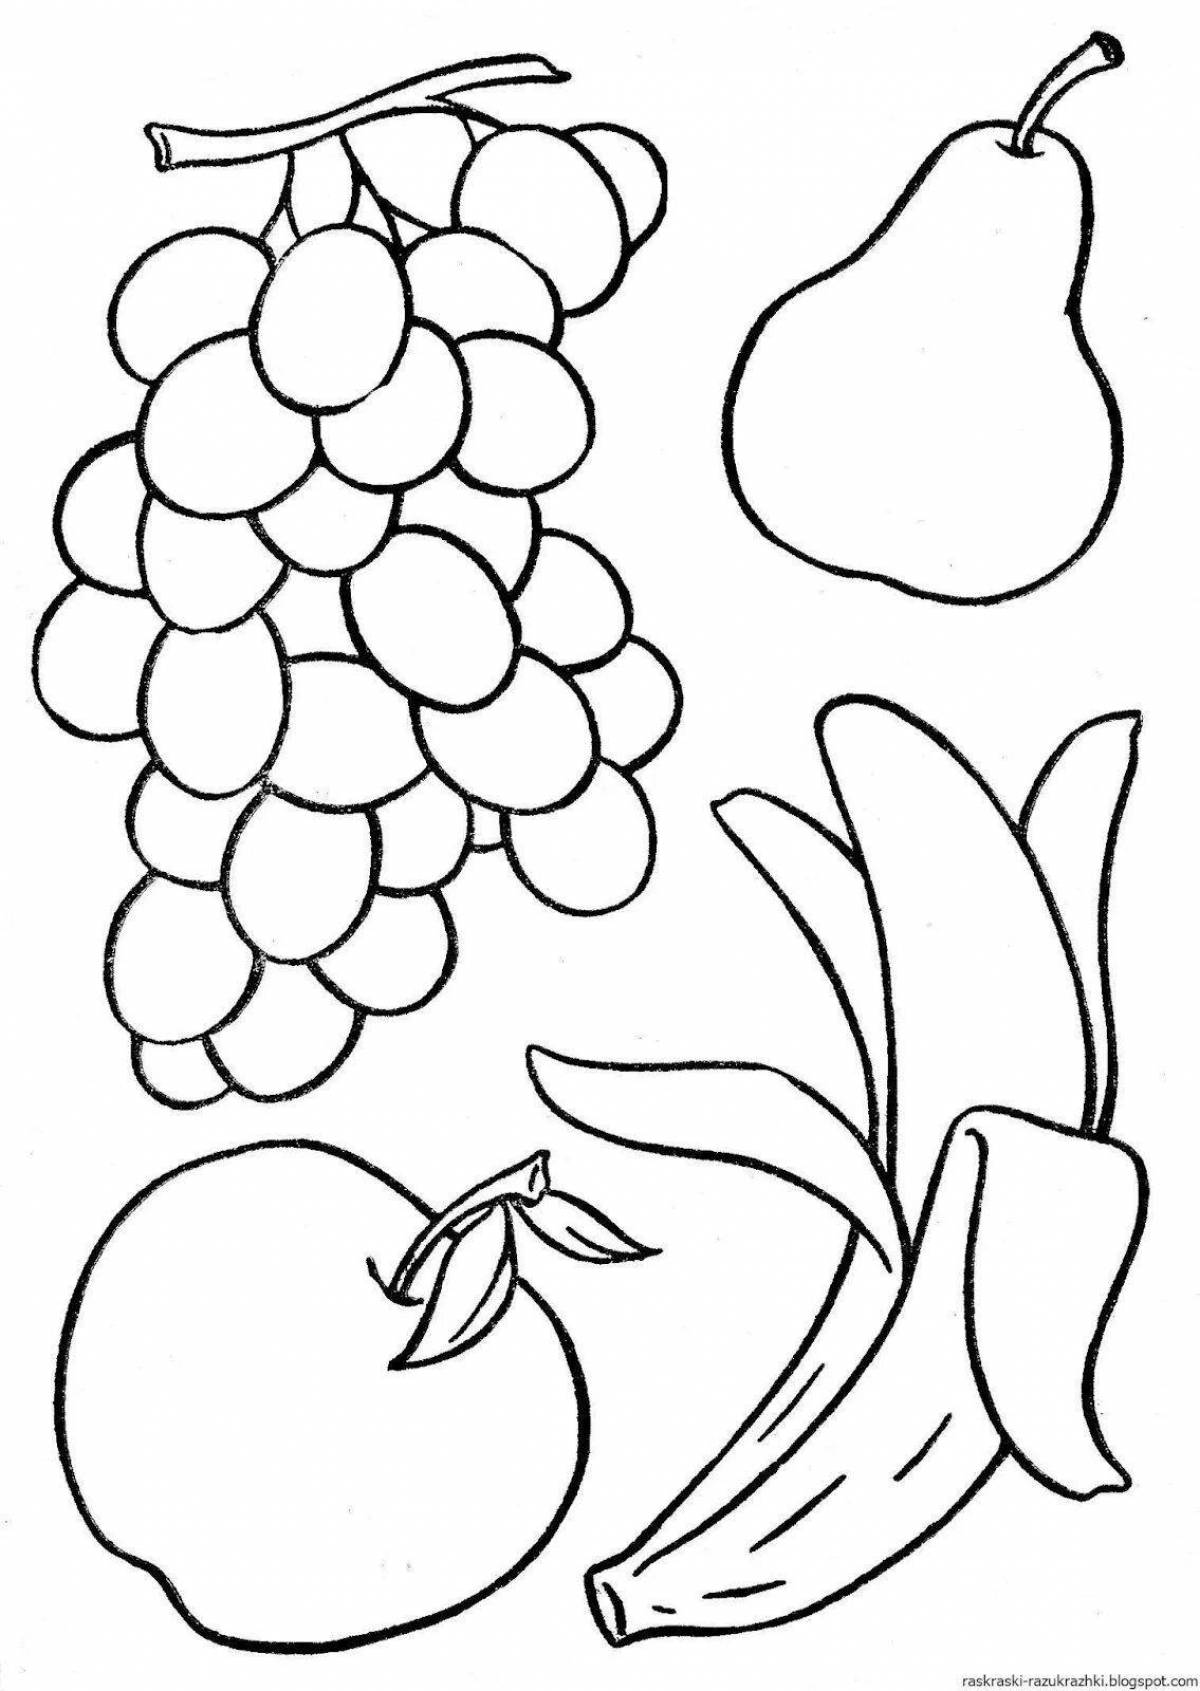 Colorful and playful fruit coloring pages for 5-6 year olds